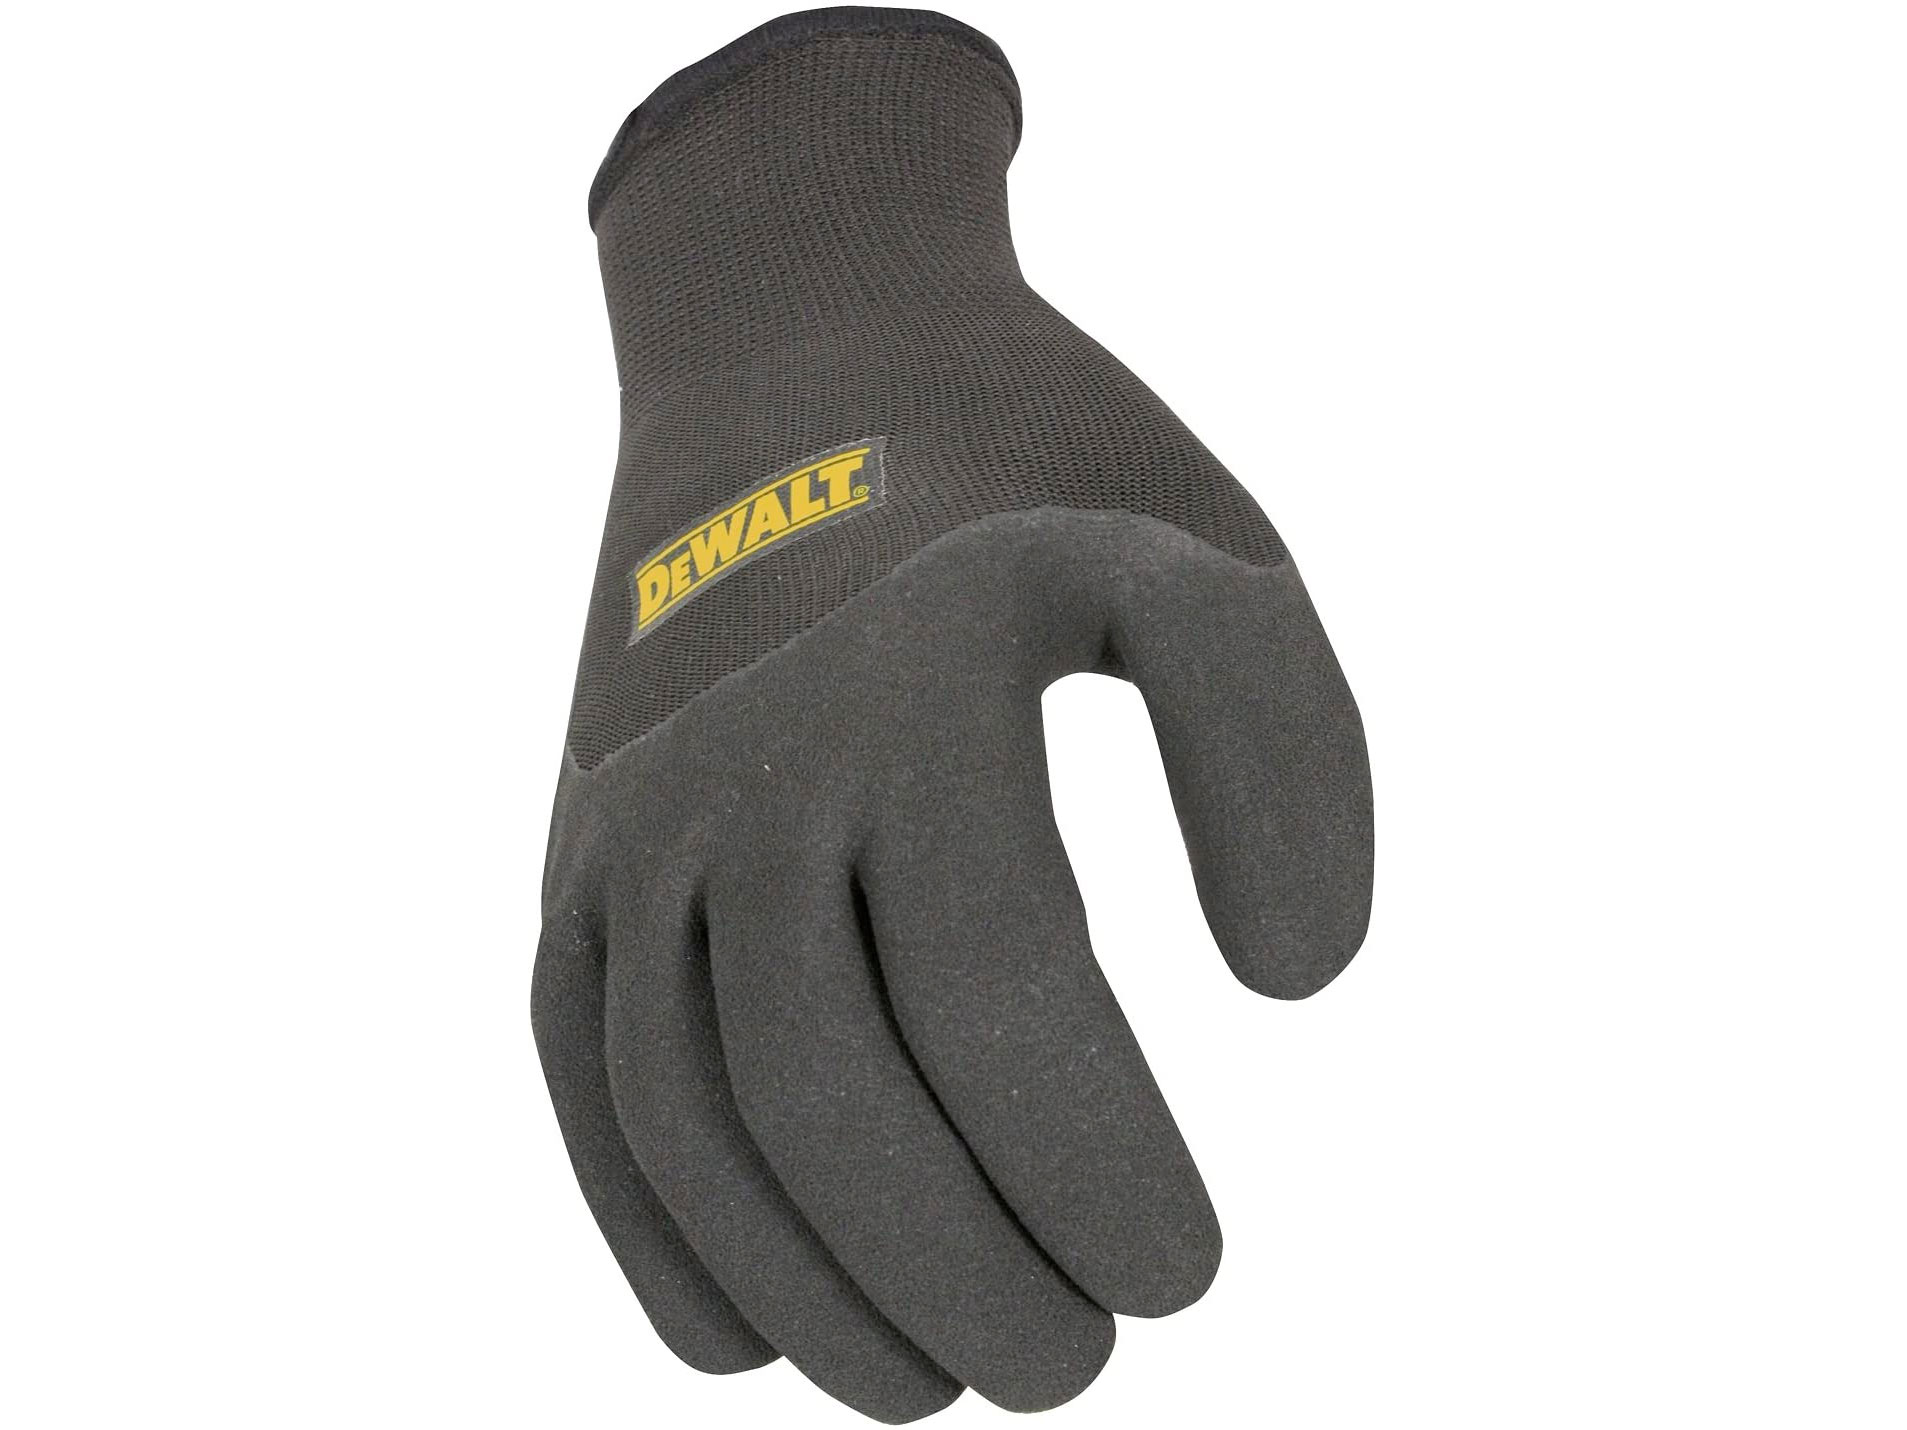 Amazon：DEWALT Thermal Insulated Grip Glove (Pack of 2)只卖$9.98